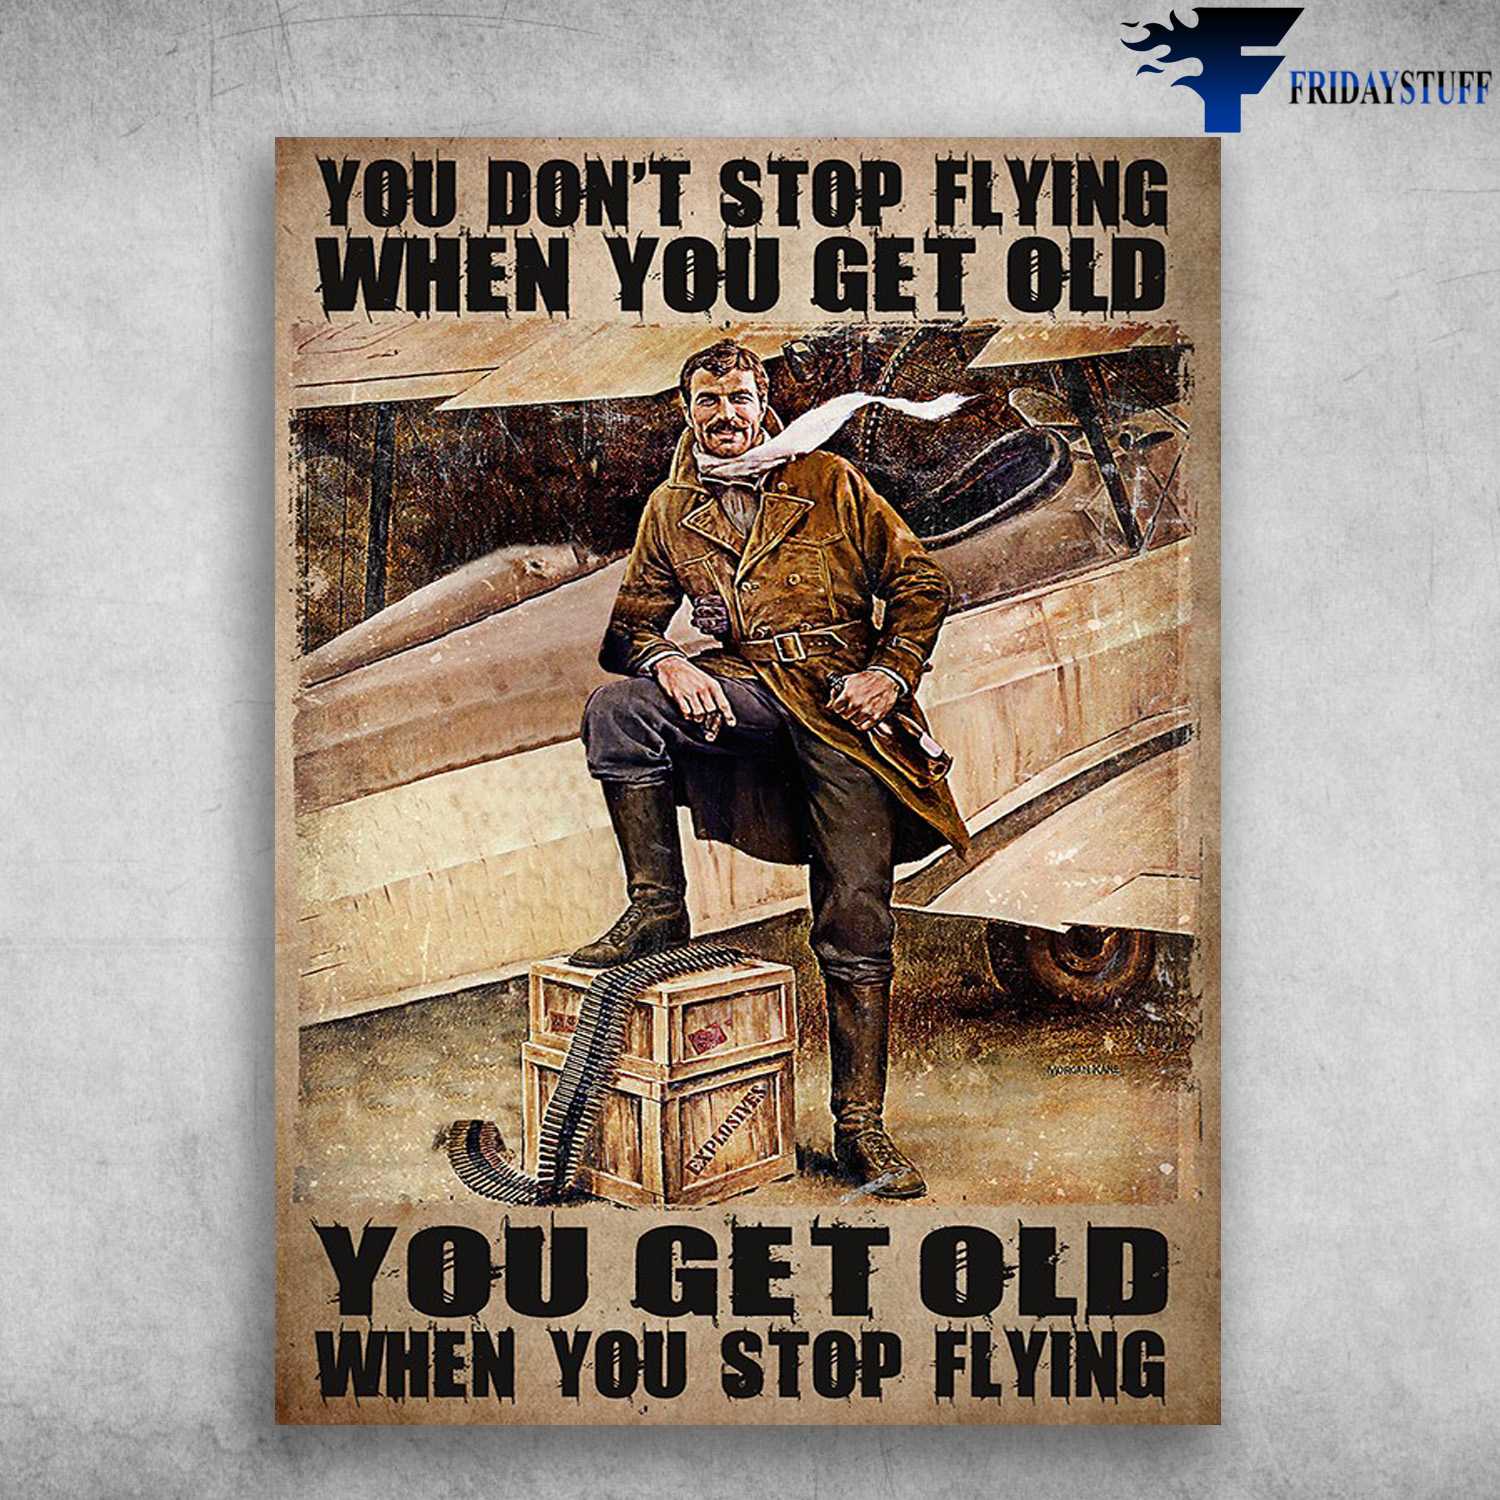 Pilot Airplane - You Don't Stop Flying When You Get Old, You Get Old When You Stop Flying